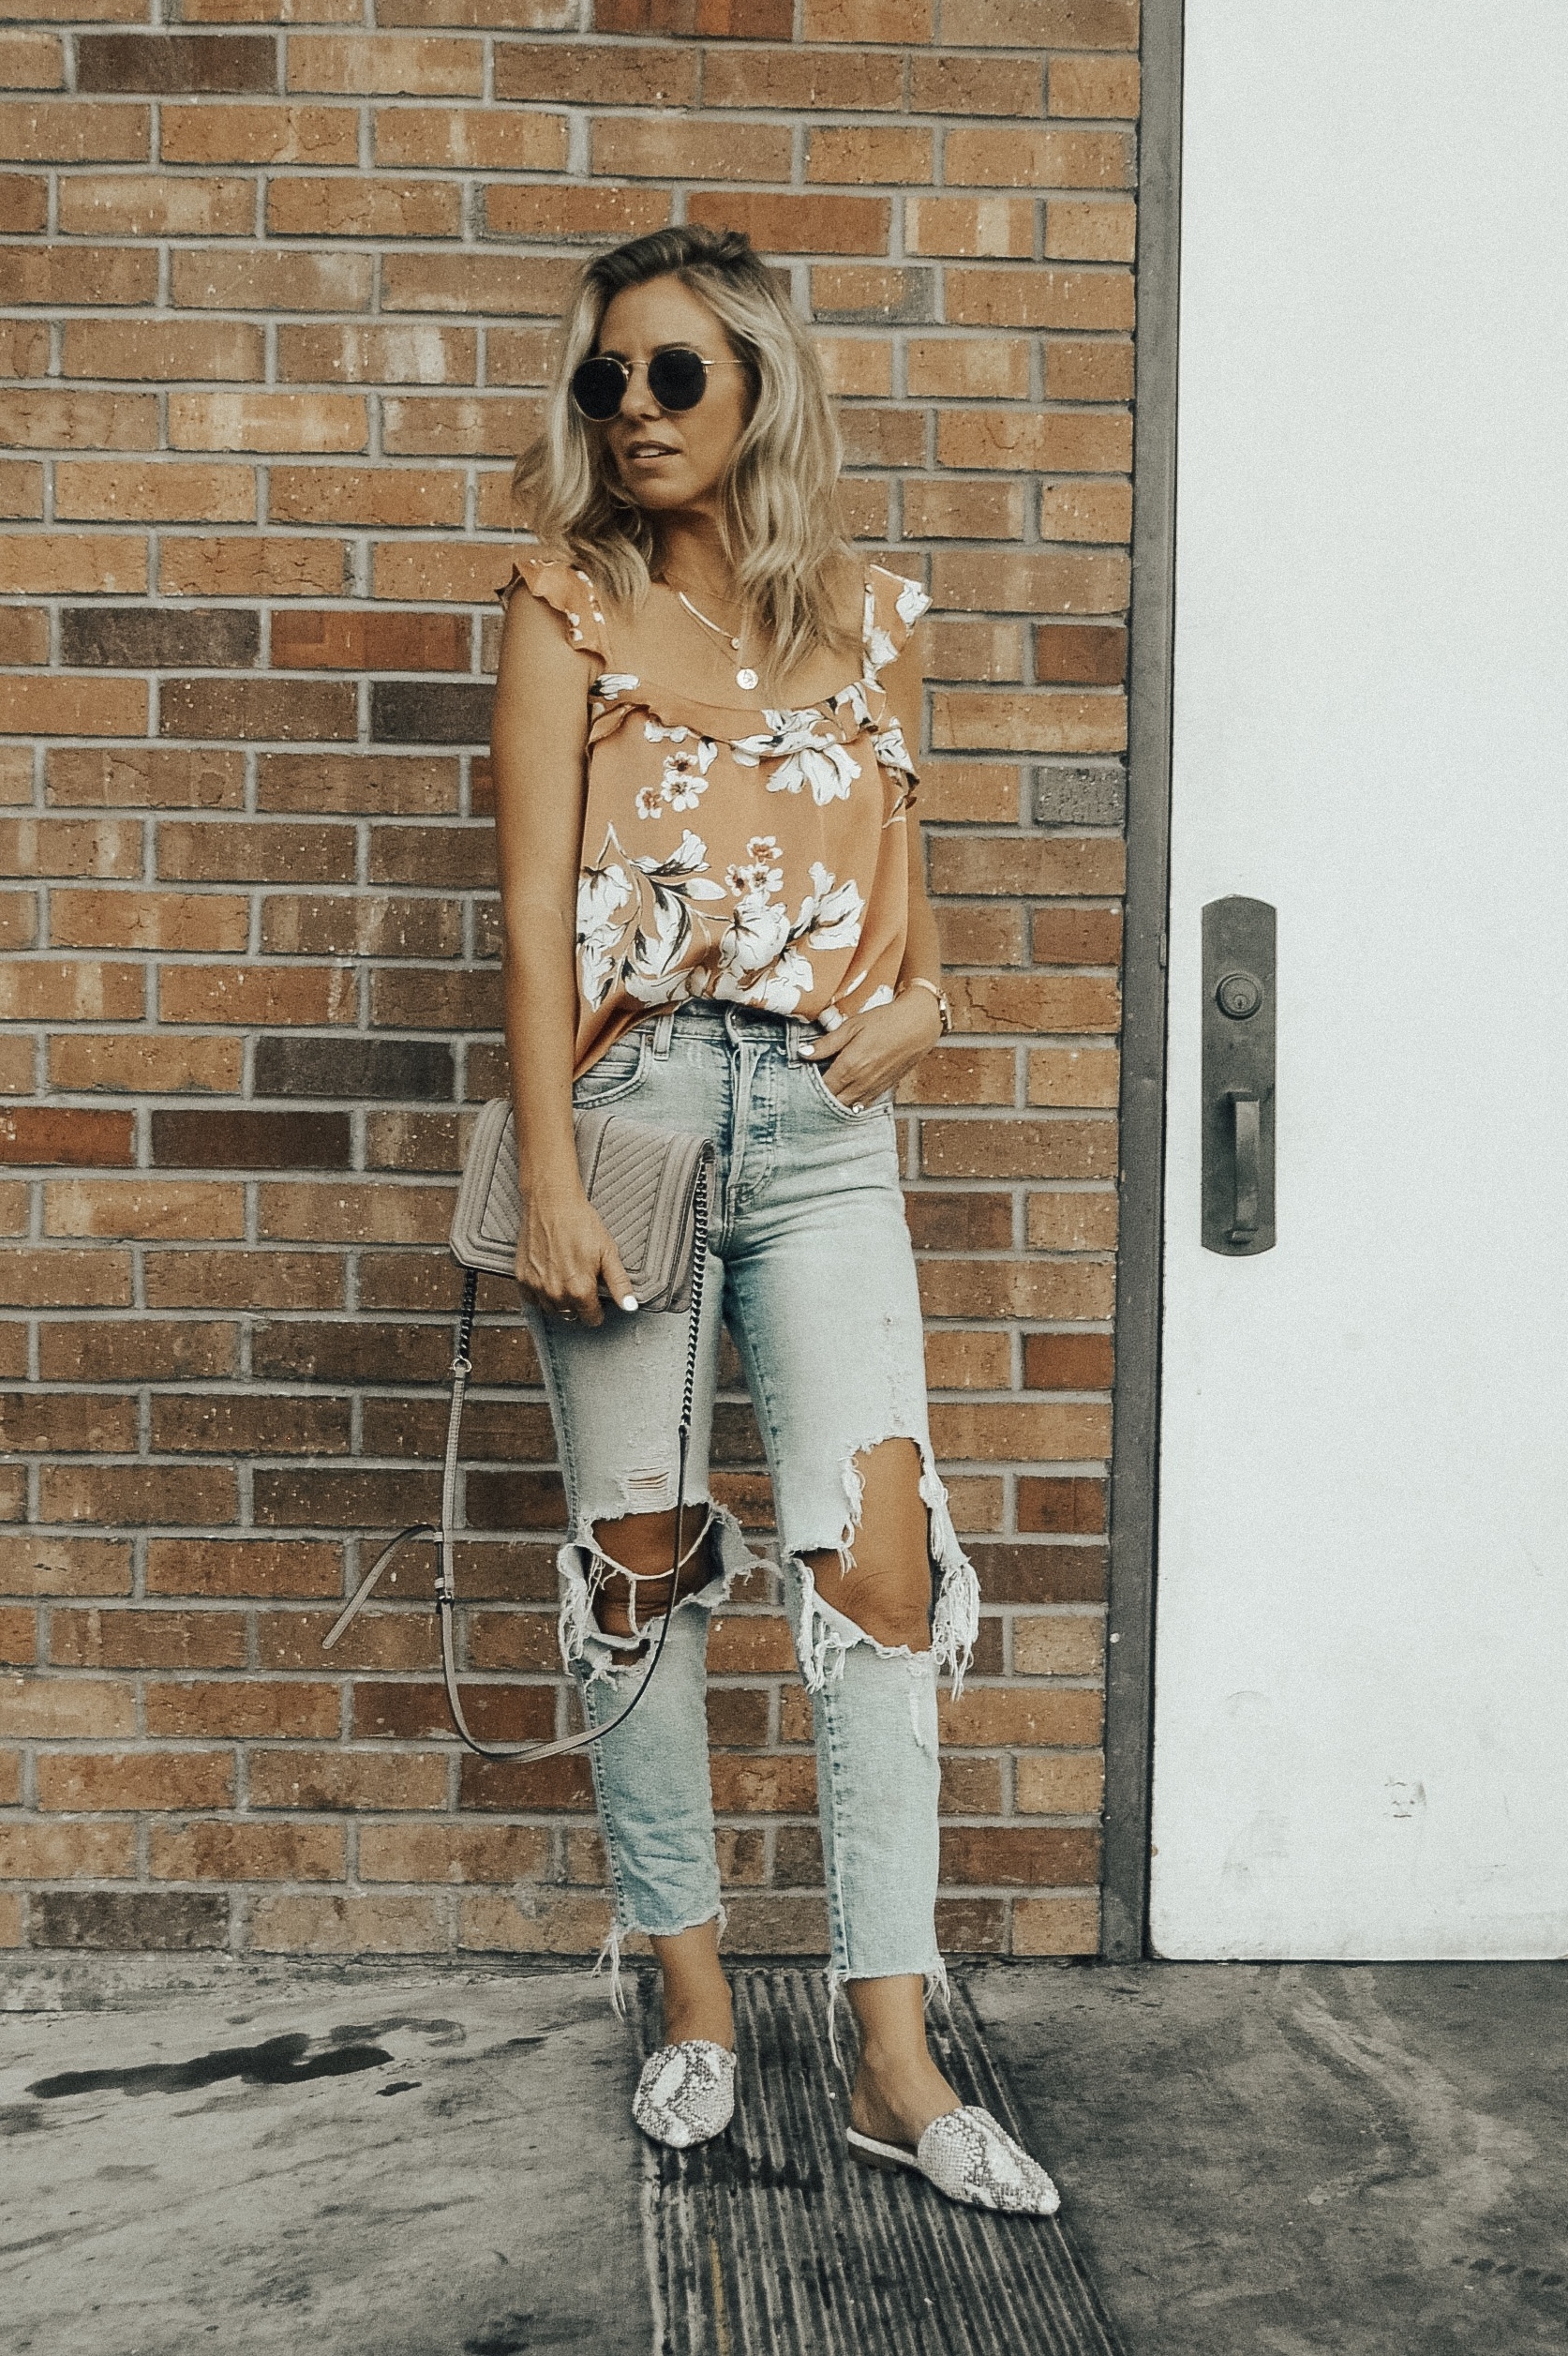 MATCHING SETS WITH BISHOP + YOUNG - Jaclyn De Leon Style + floral tank top + distressed denim + bohemian + Rebecca Minkoff handbag + fall outfit + summer style + casual street style + boho chic + Nordstrom + Zappos + Versatility of matching sets + mix and match + snakeskin studded mules